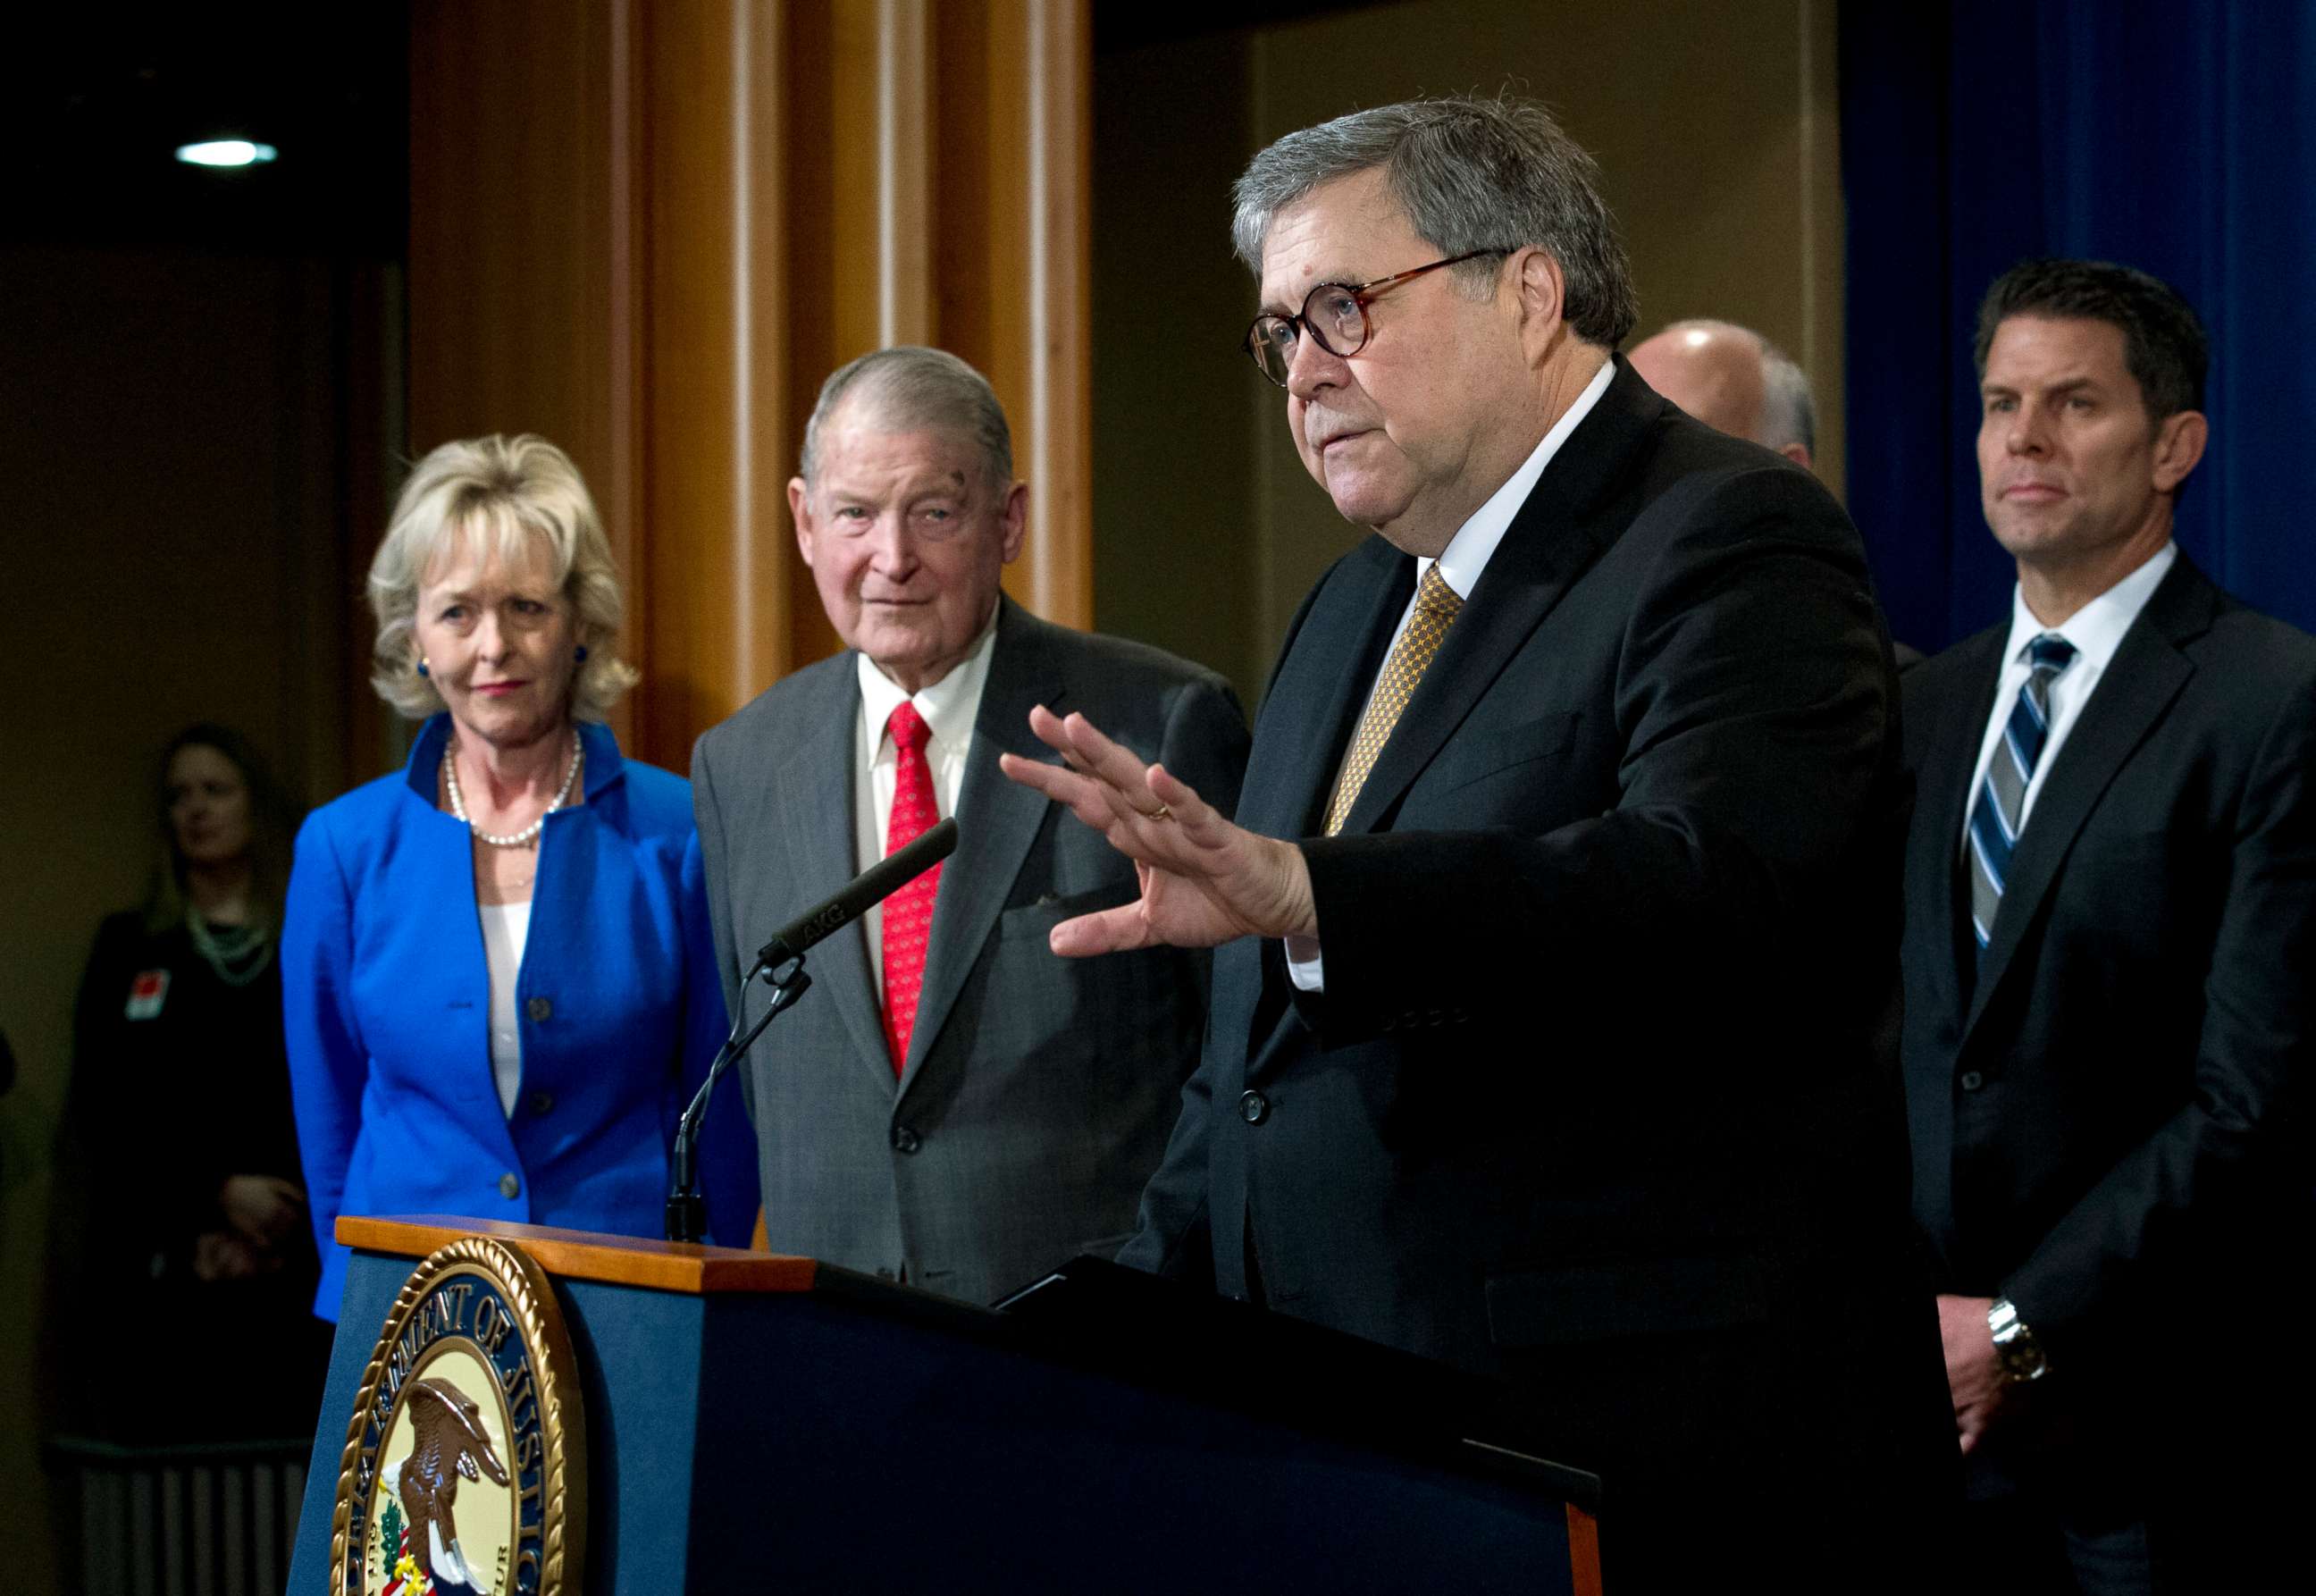 PHOTO: Former director of the FBI and CIA, William Webster, accompanied by his wife Lynda Webster, watches as Attorney General William Barr speaks during a news conference in Washington, March 7, 2019.